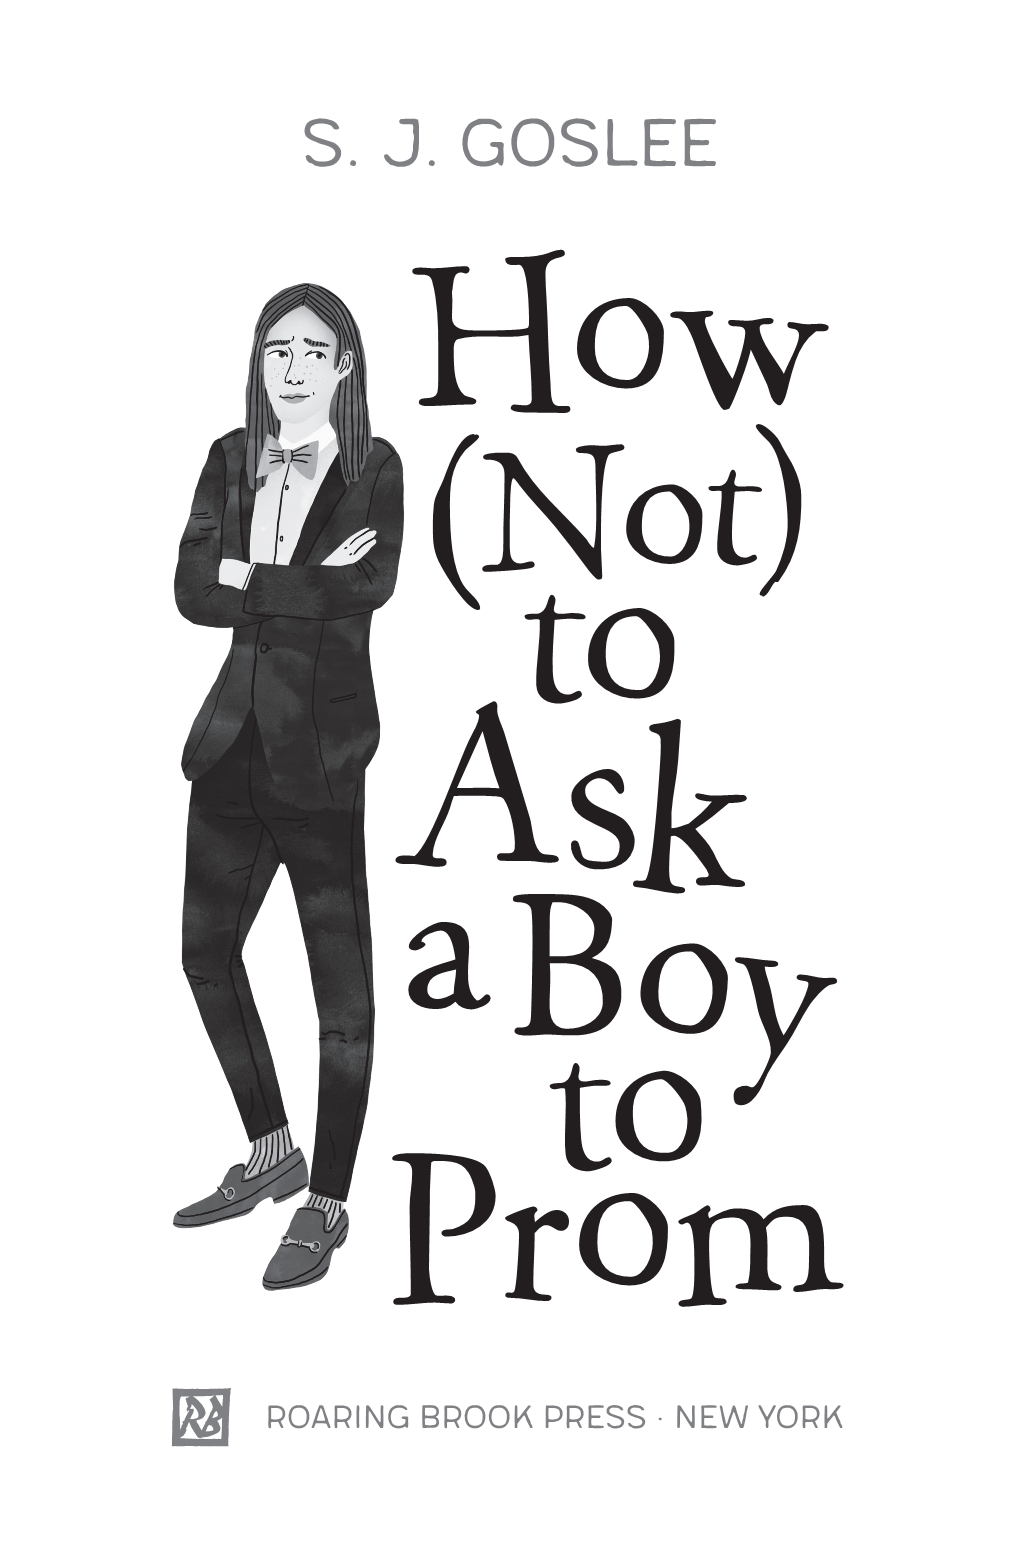 S. J. GOSLEE How (Not) to Ask a Boy to Prom —-1 —0 ROARING BROOK PRESS • NEW YORK —+1